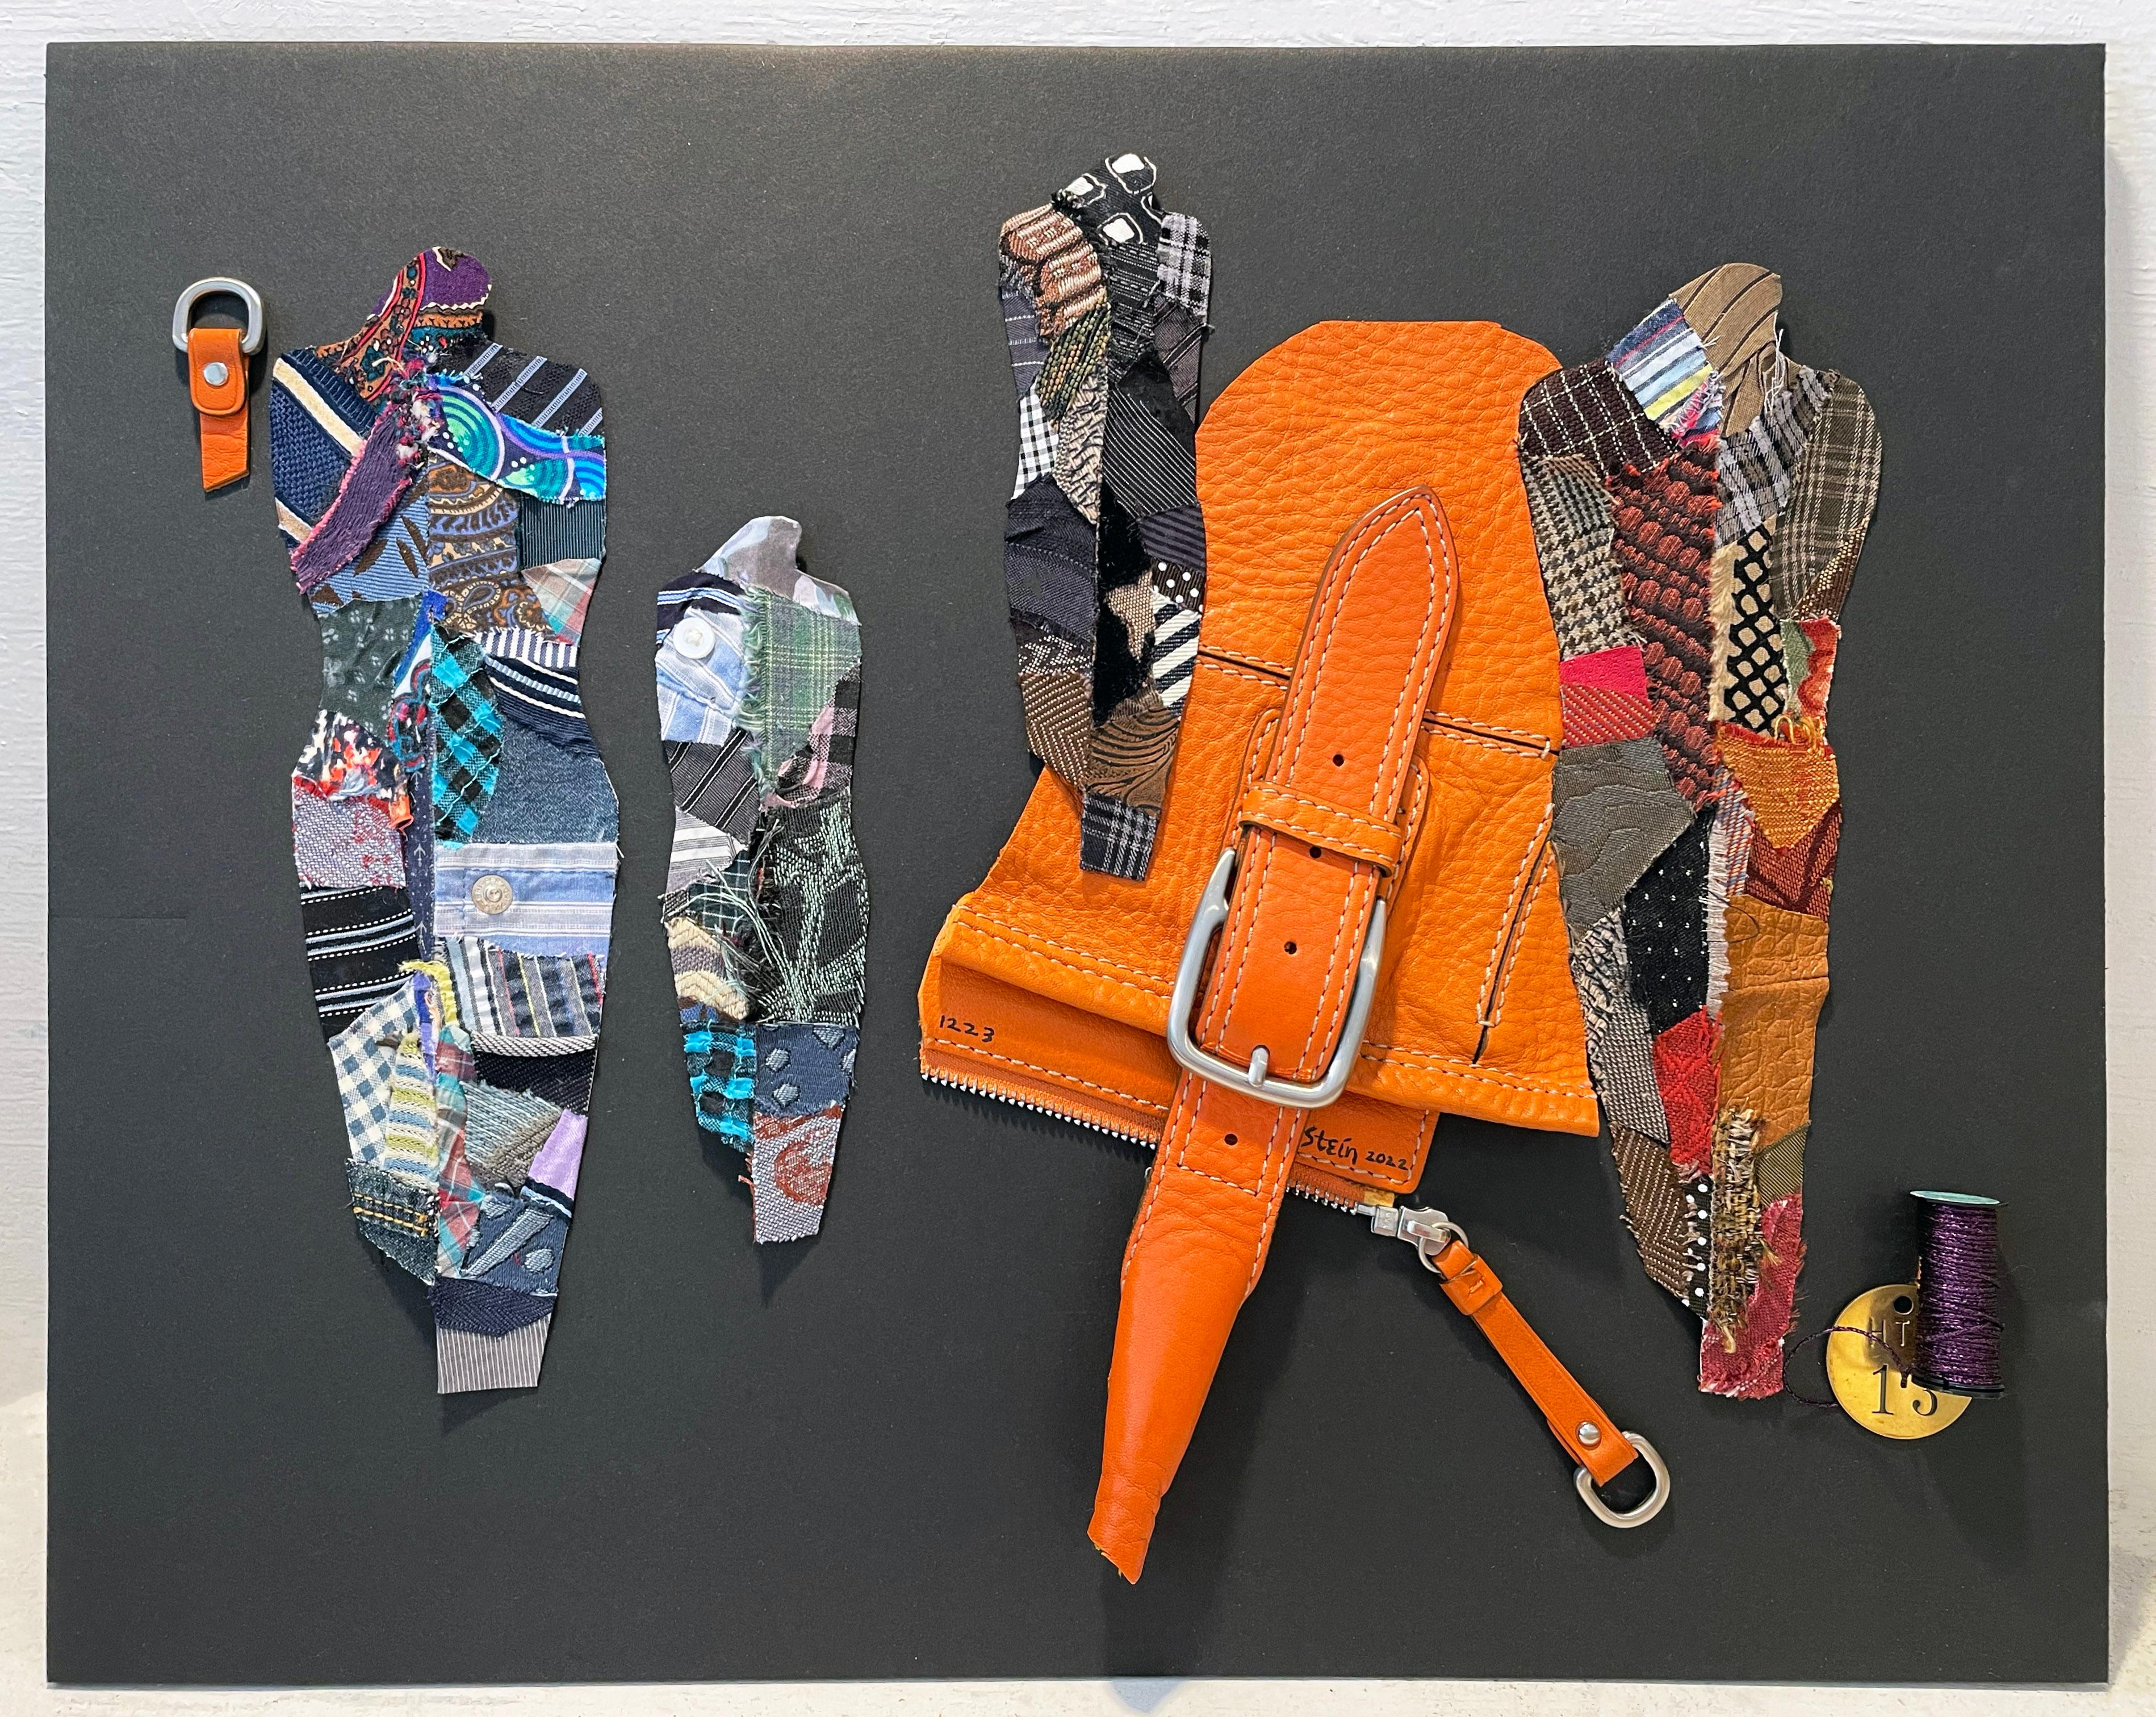 Linda Stein, 1223 - Contemporary Art 3D Mixed Media Fabric Sculptural Collage

Linda Stein started her Knights of Protection series after she was forced to evacuate her New York downtown studio for a year post-9/11.  Stein's Knights are shield-like